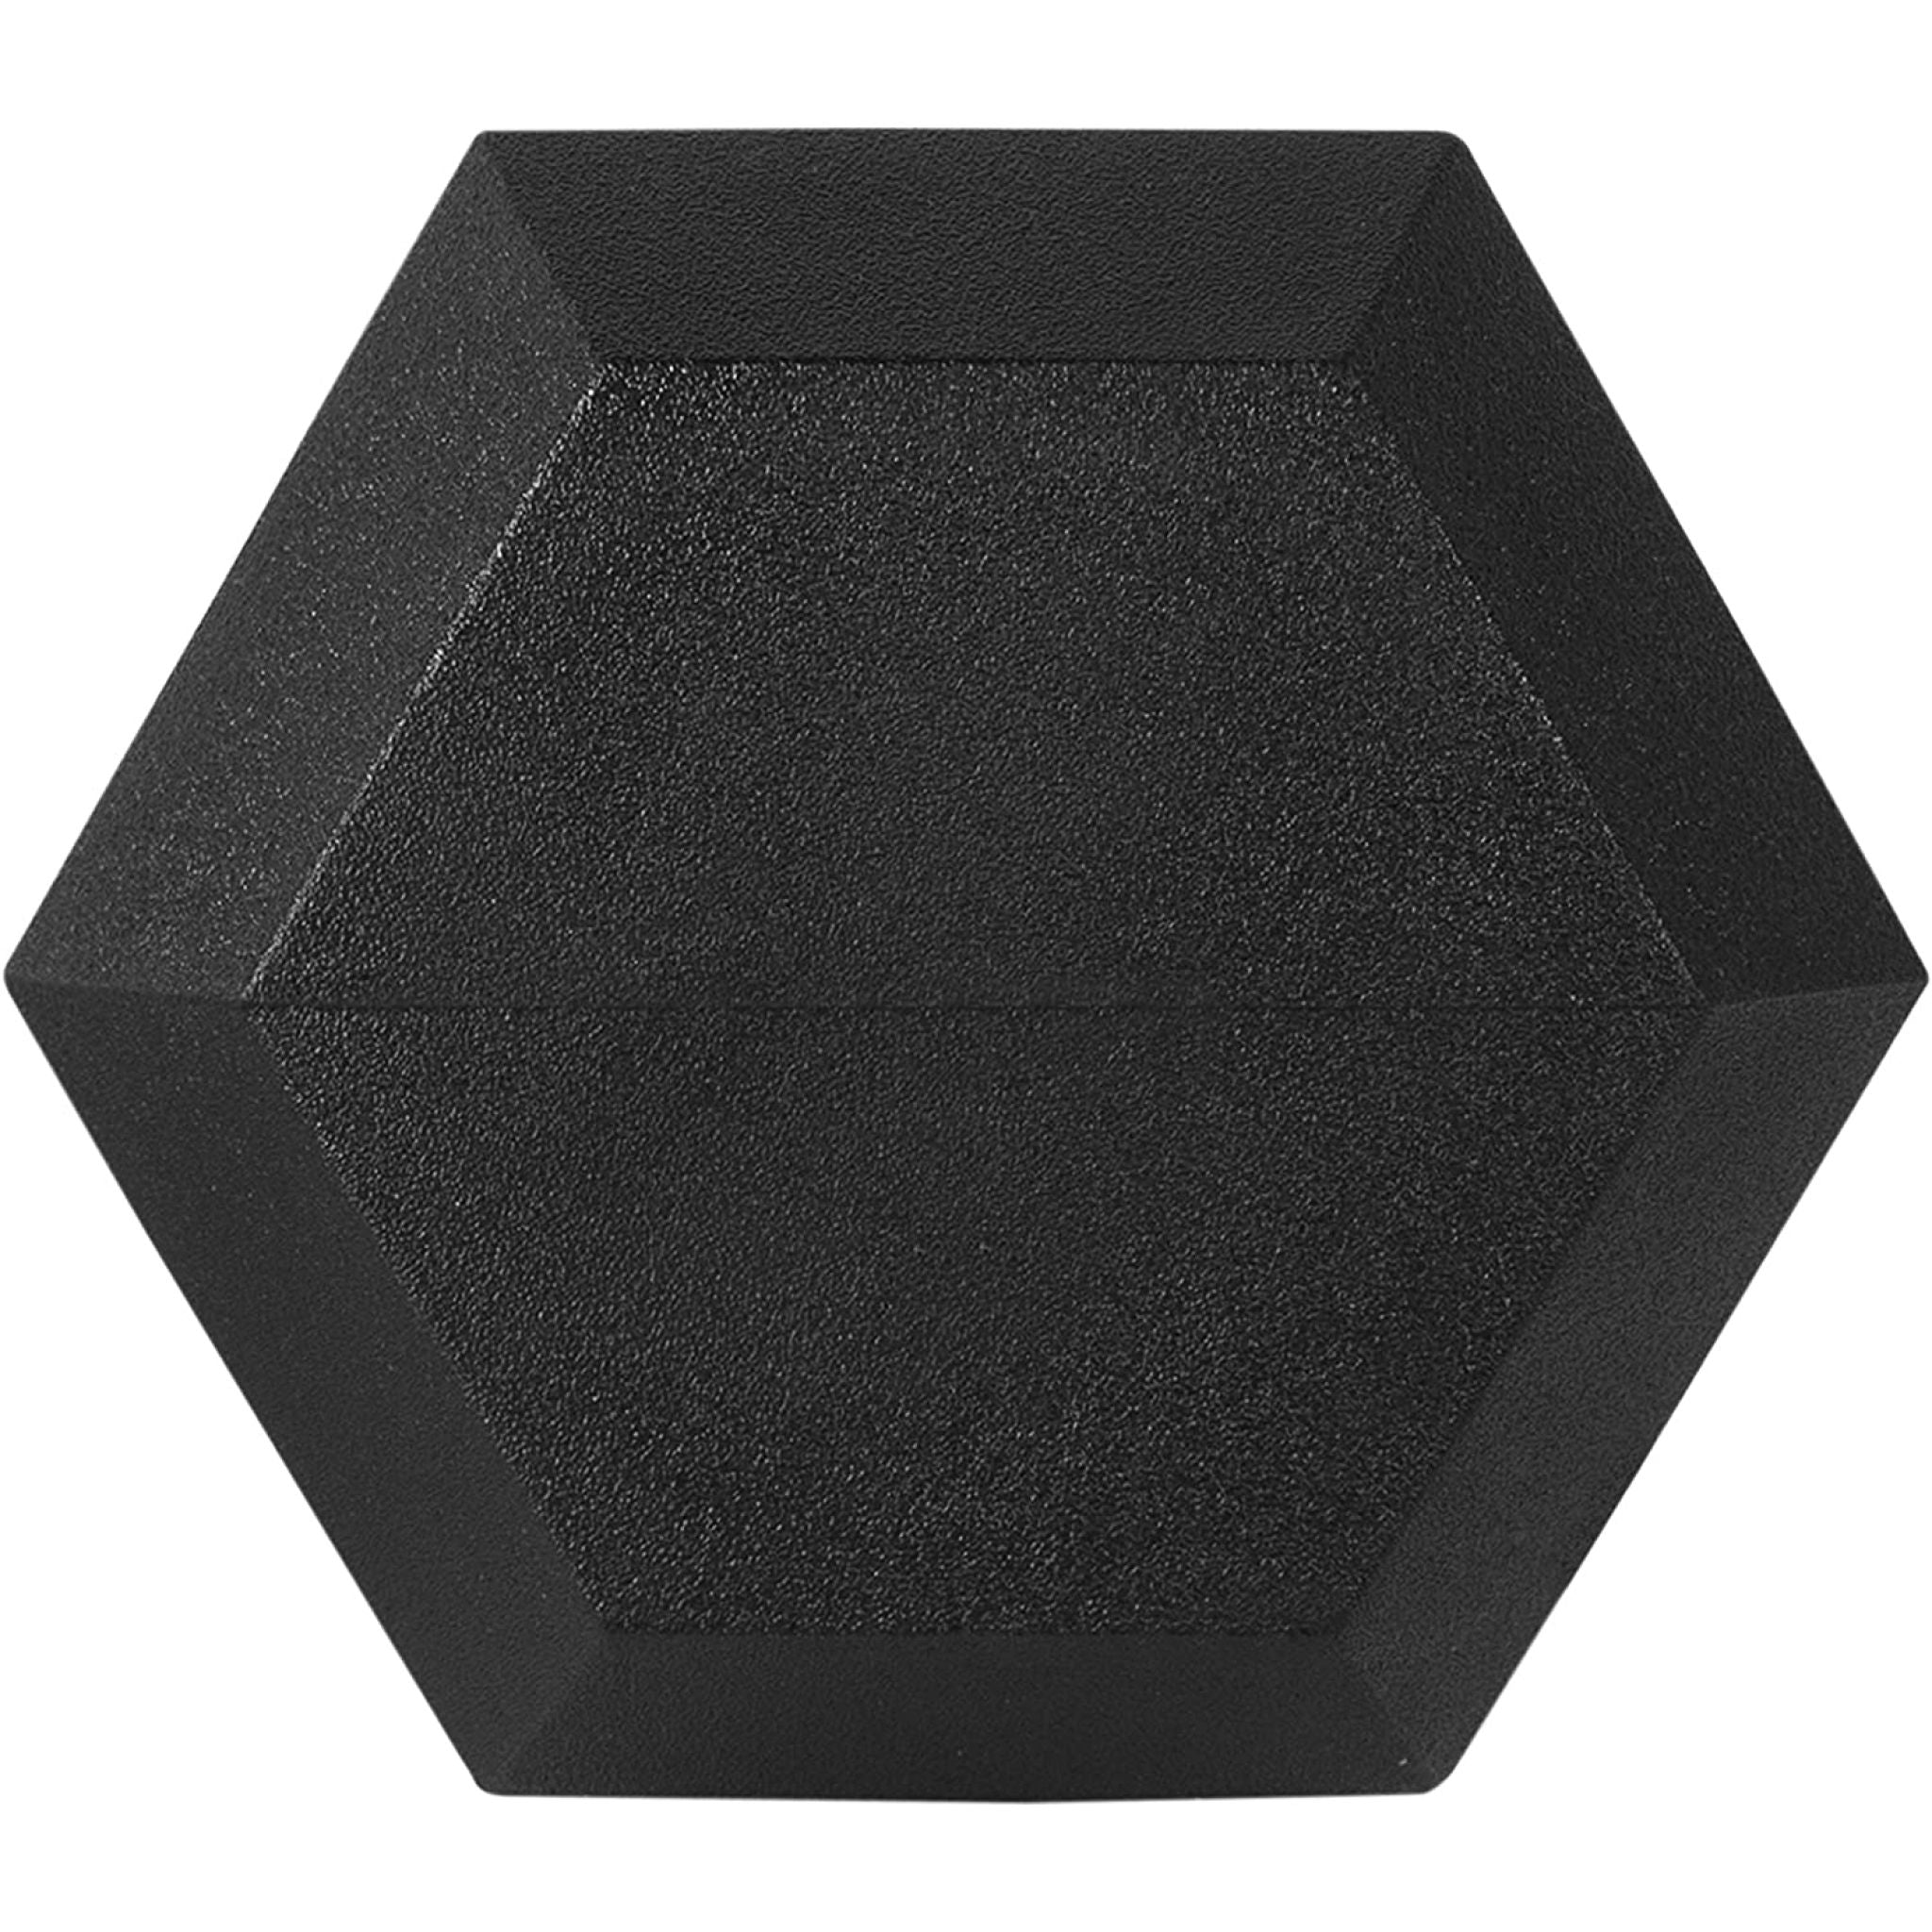 Rubber hexagon end of dumbbell at Express Gym Supply